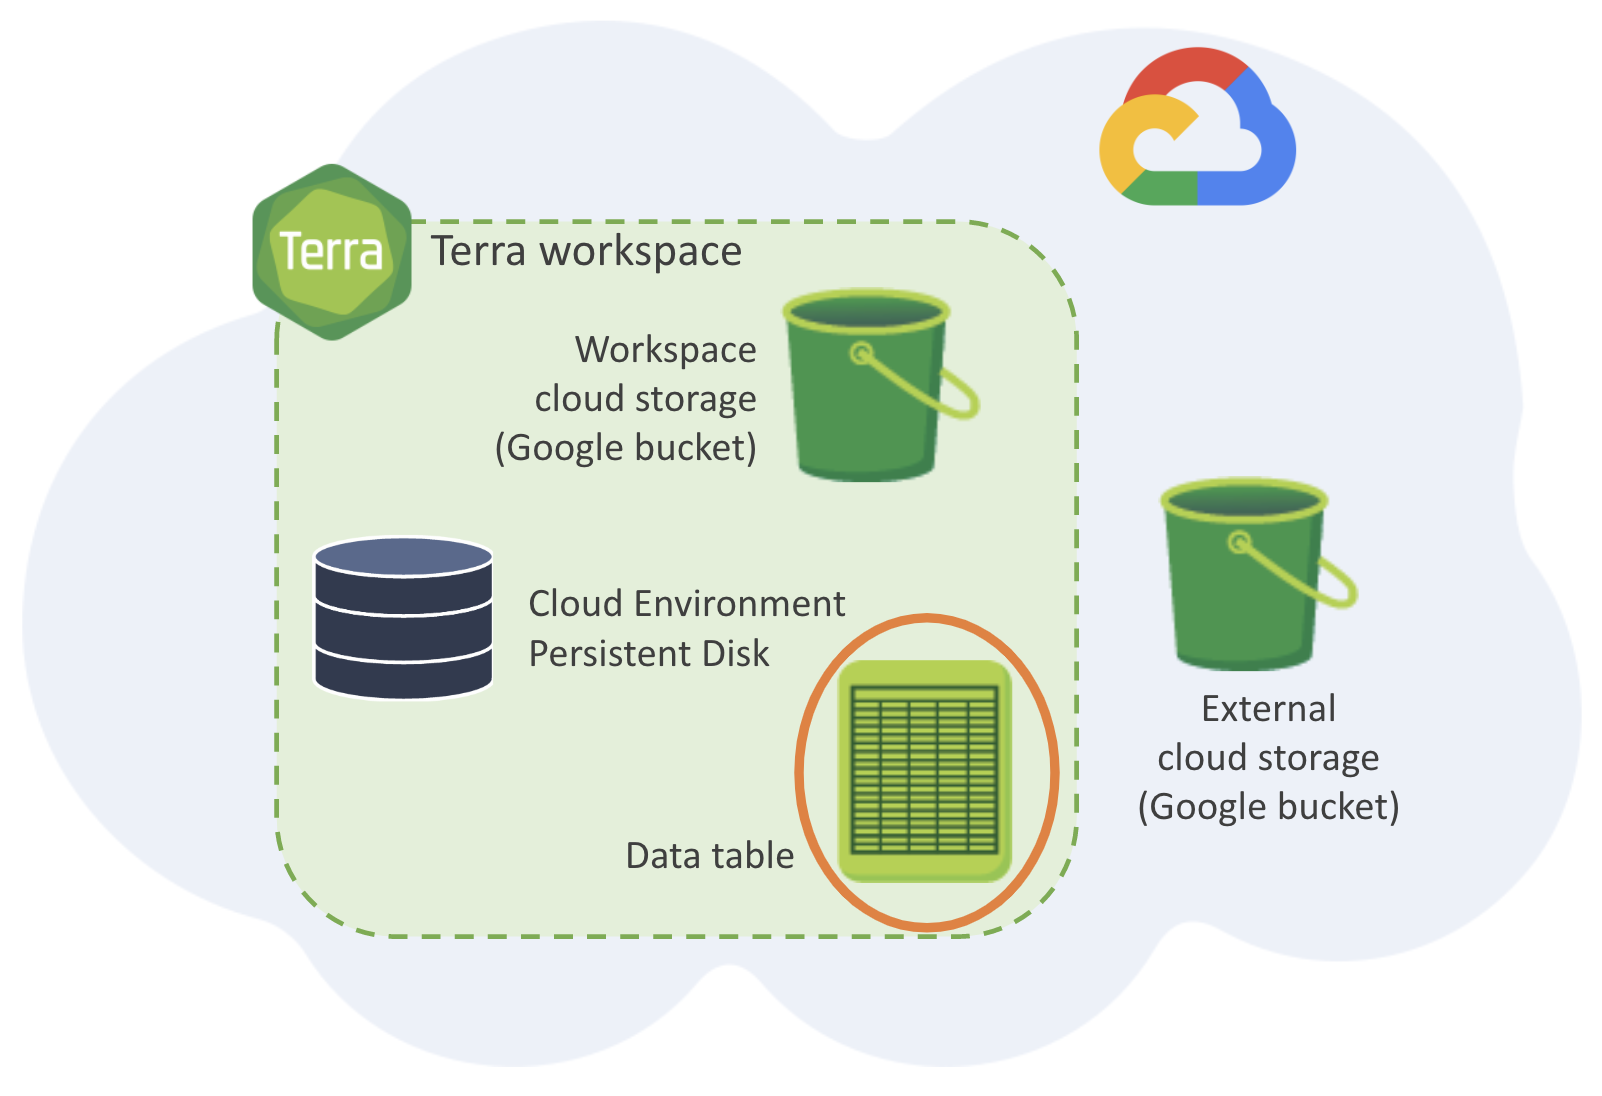 diagram of Google cloud with a Terra workspace inside. The data table - highlighted with a circle - is inside the Terra workspace perimeter , along with the workspace storage (Google bucket) and persistent disk storage